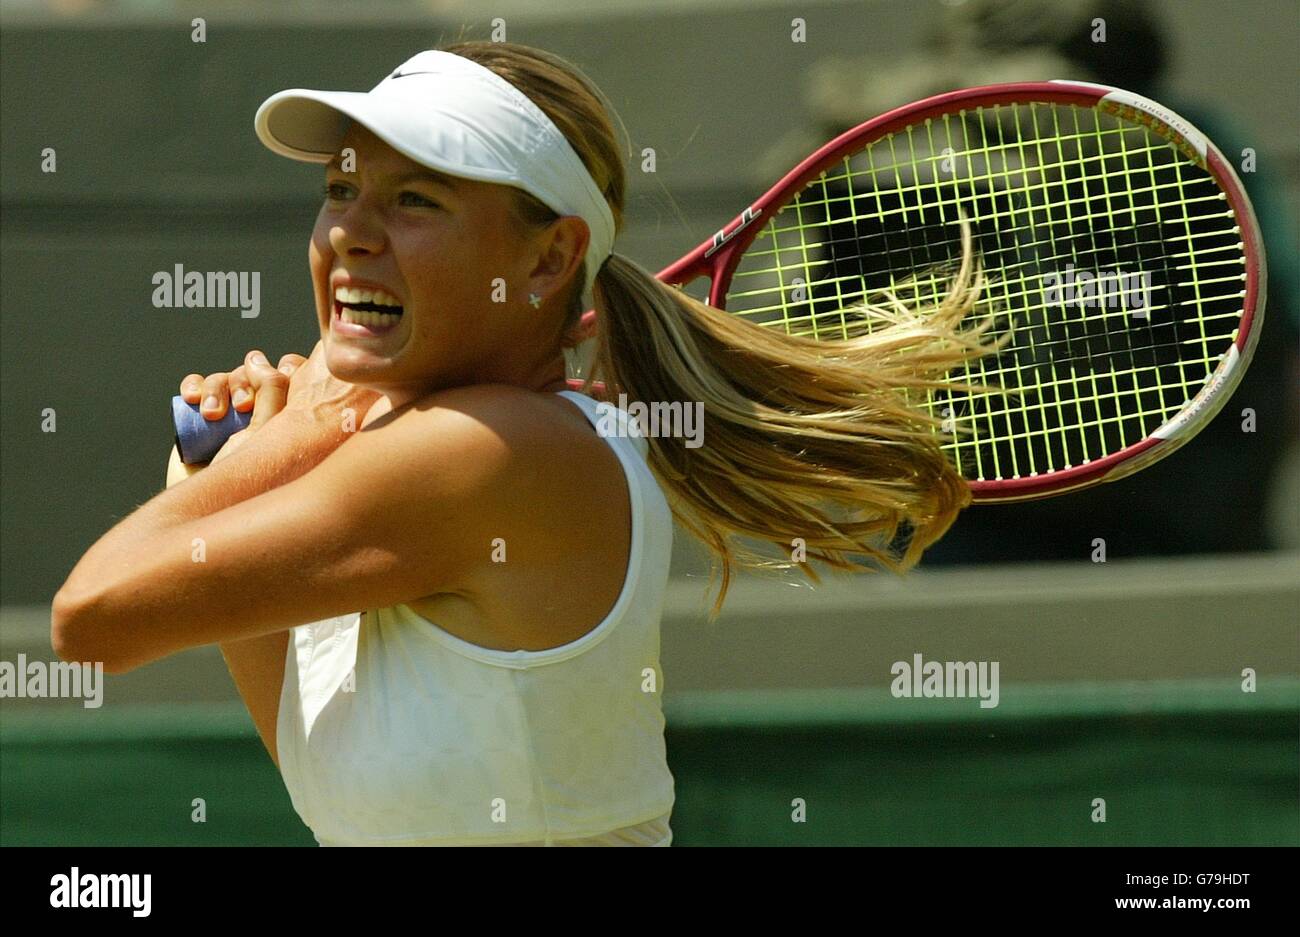 EDITORIAL USE ONLY, NO MOBILE PHONE USE Maria Sharapova from Russia in action against Jelena Dokic from Serbia Montenegro in the third round at the All England Lawn Tennis Championships at Wimbledon. Stock Photo